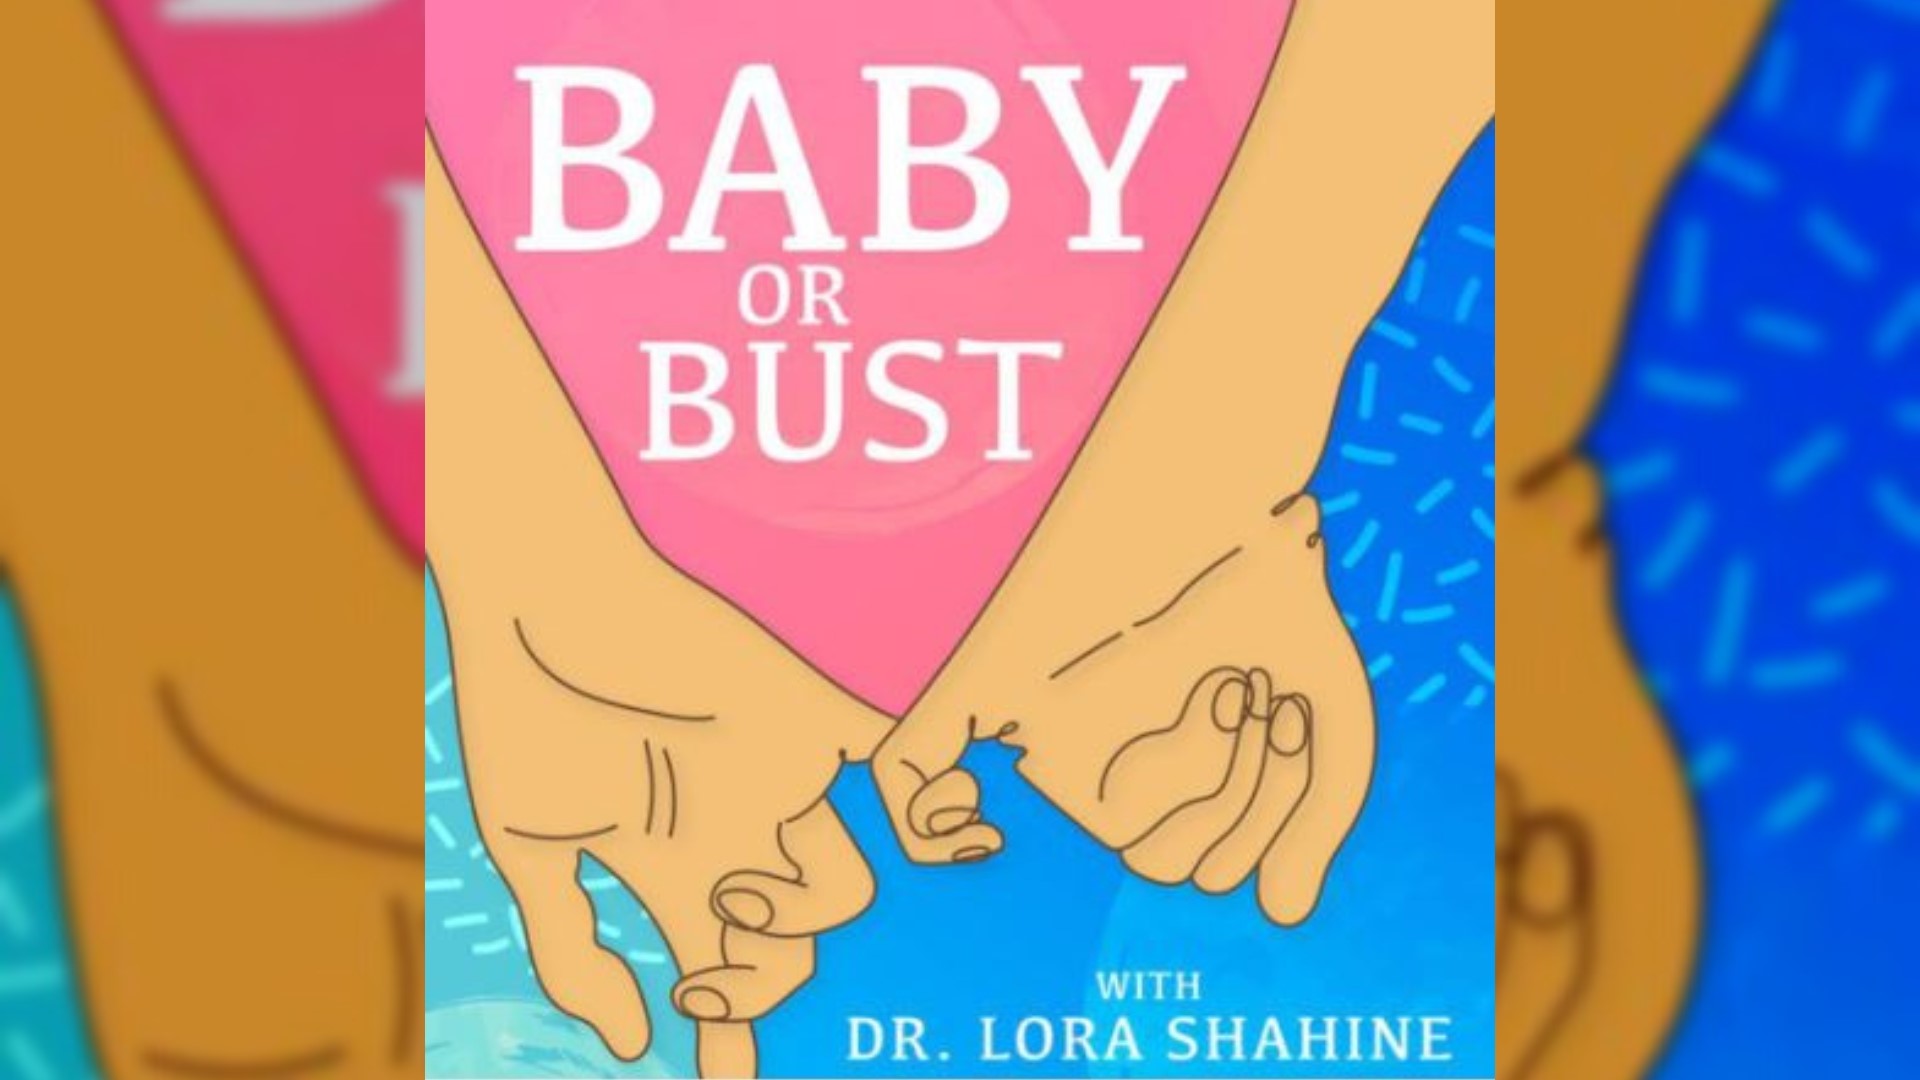 Dr. Lora Shahine's new podcast, "Baby or Bust," aims to open up the conversation, and bust misconceptions, about fertility. #newdaynw